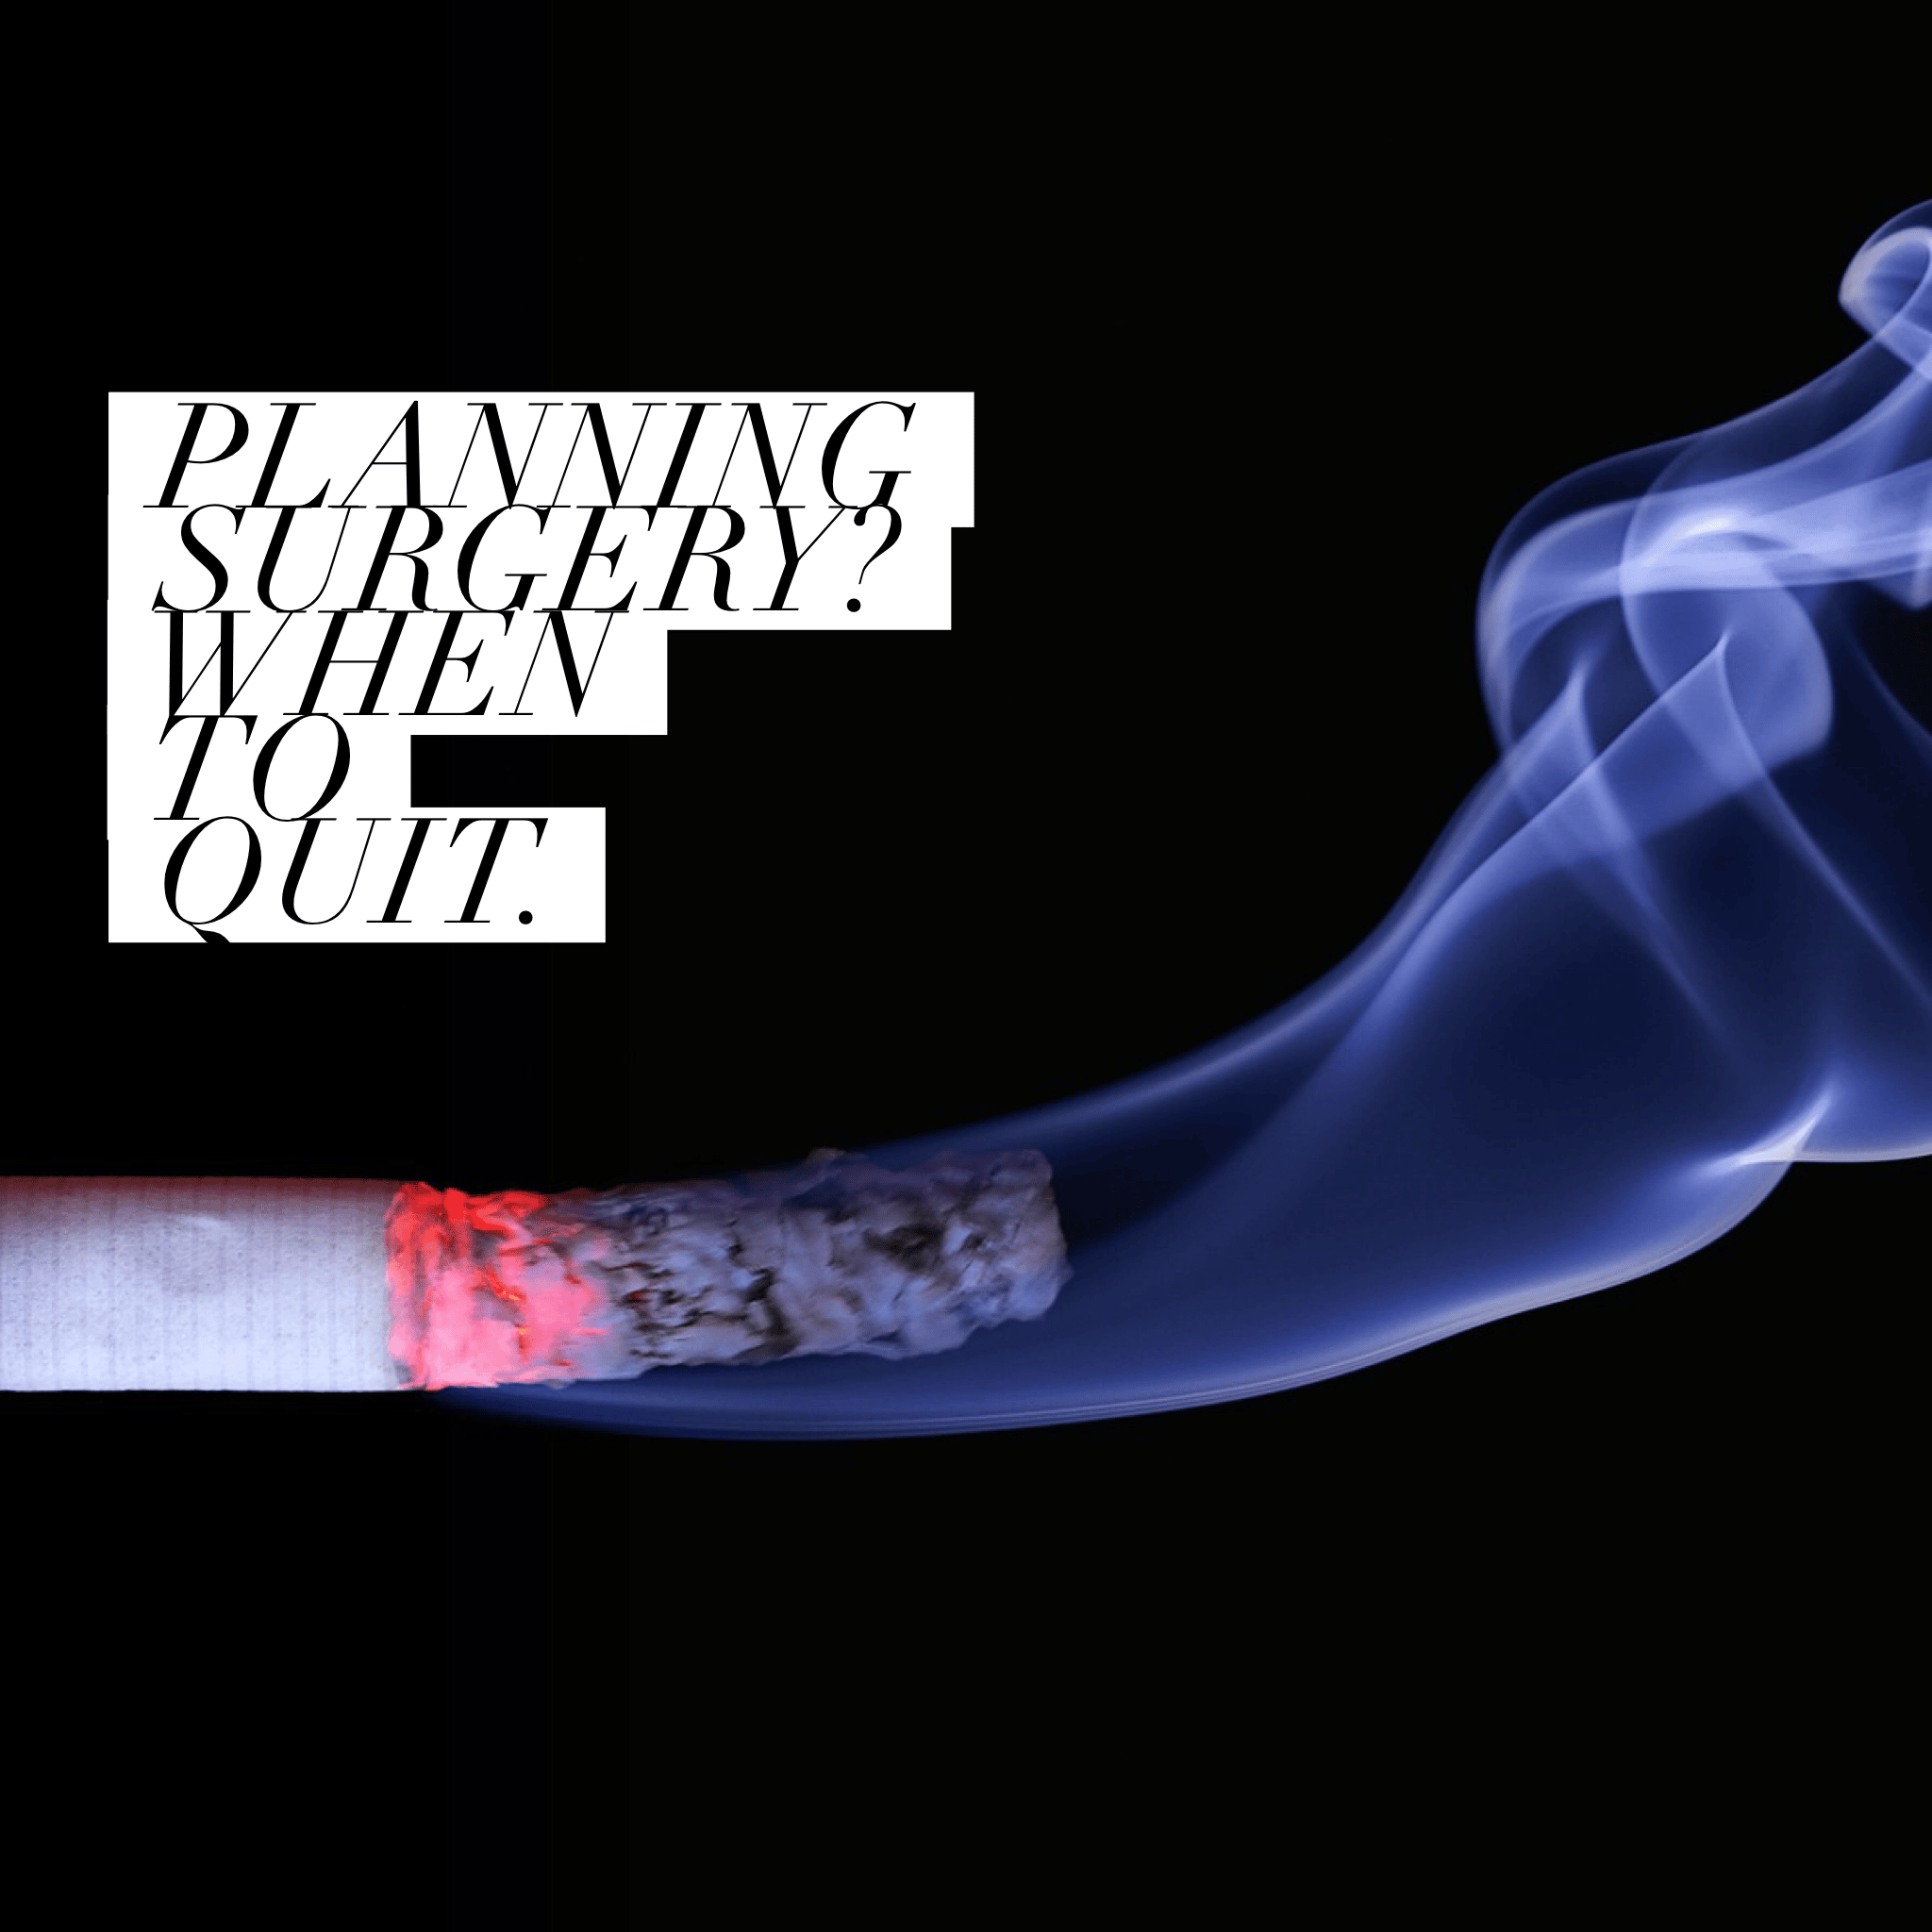 Guidelines on smoking in the peri-operative period